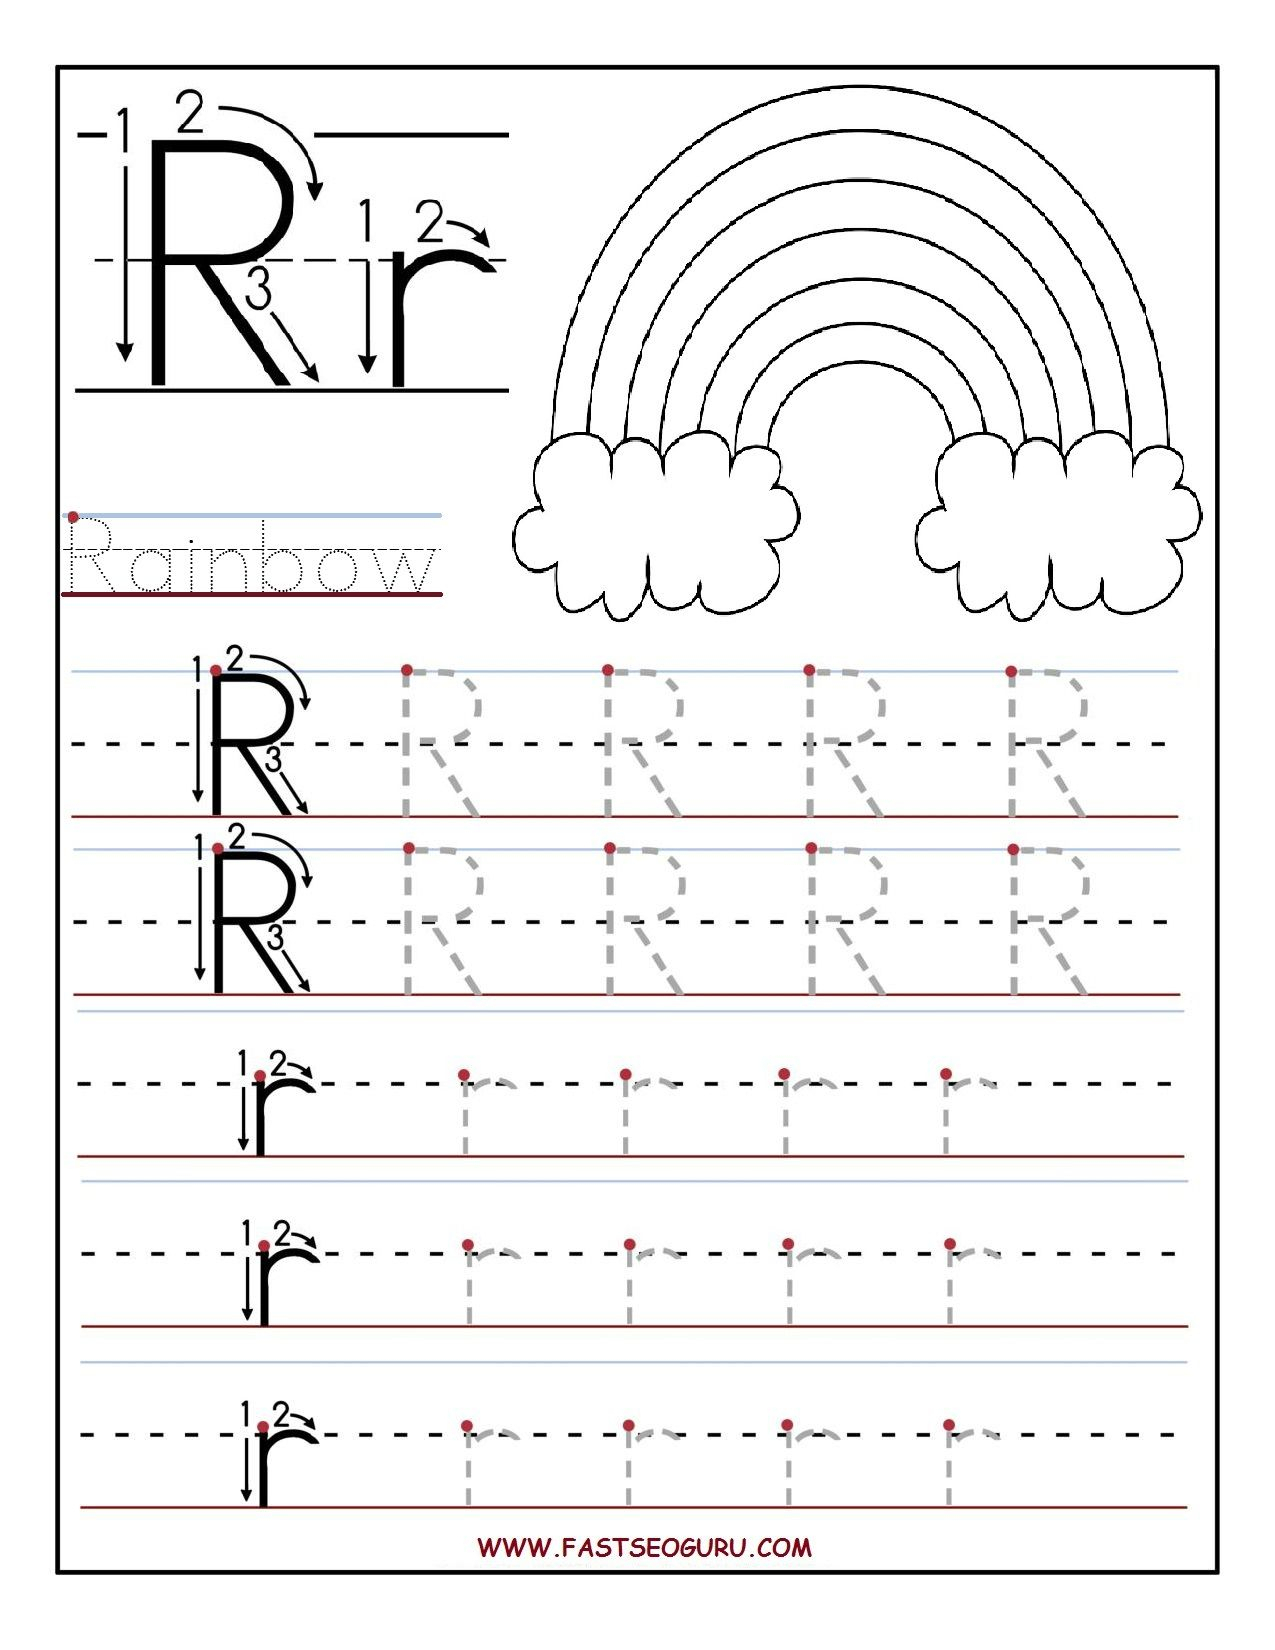 Printable Letter R Tracing Worksheets For Preschool regarding Tracing Letter R Worksheets